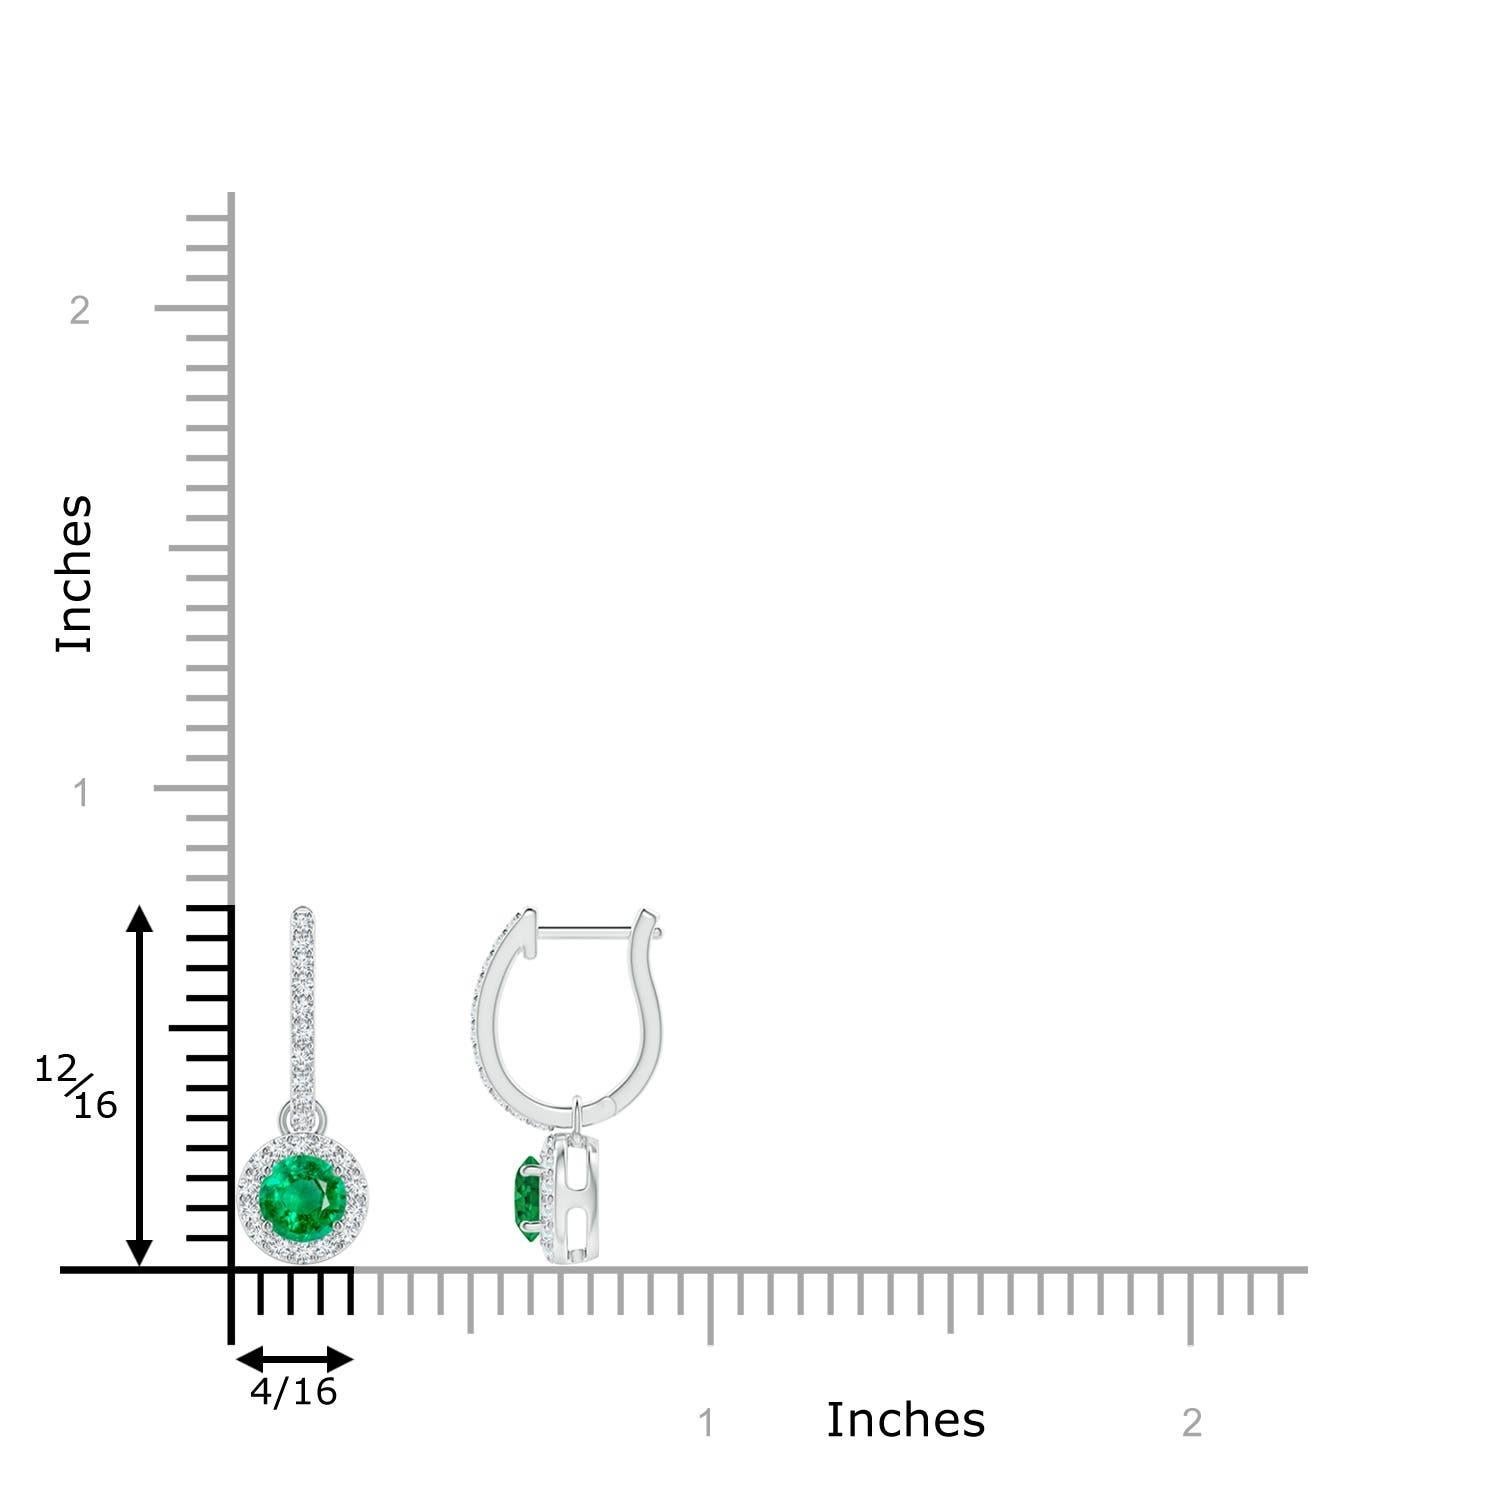 Nestled within a glimmering halo of round diamonds are round lush green emeralds in prong settings. The diamond accents on the hoop lend an additional touch of elegance to these emerald dangle earrings crafted in 14k white gold.
Emerald is the